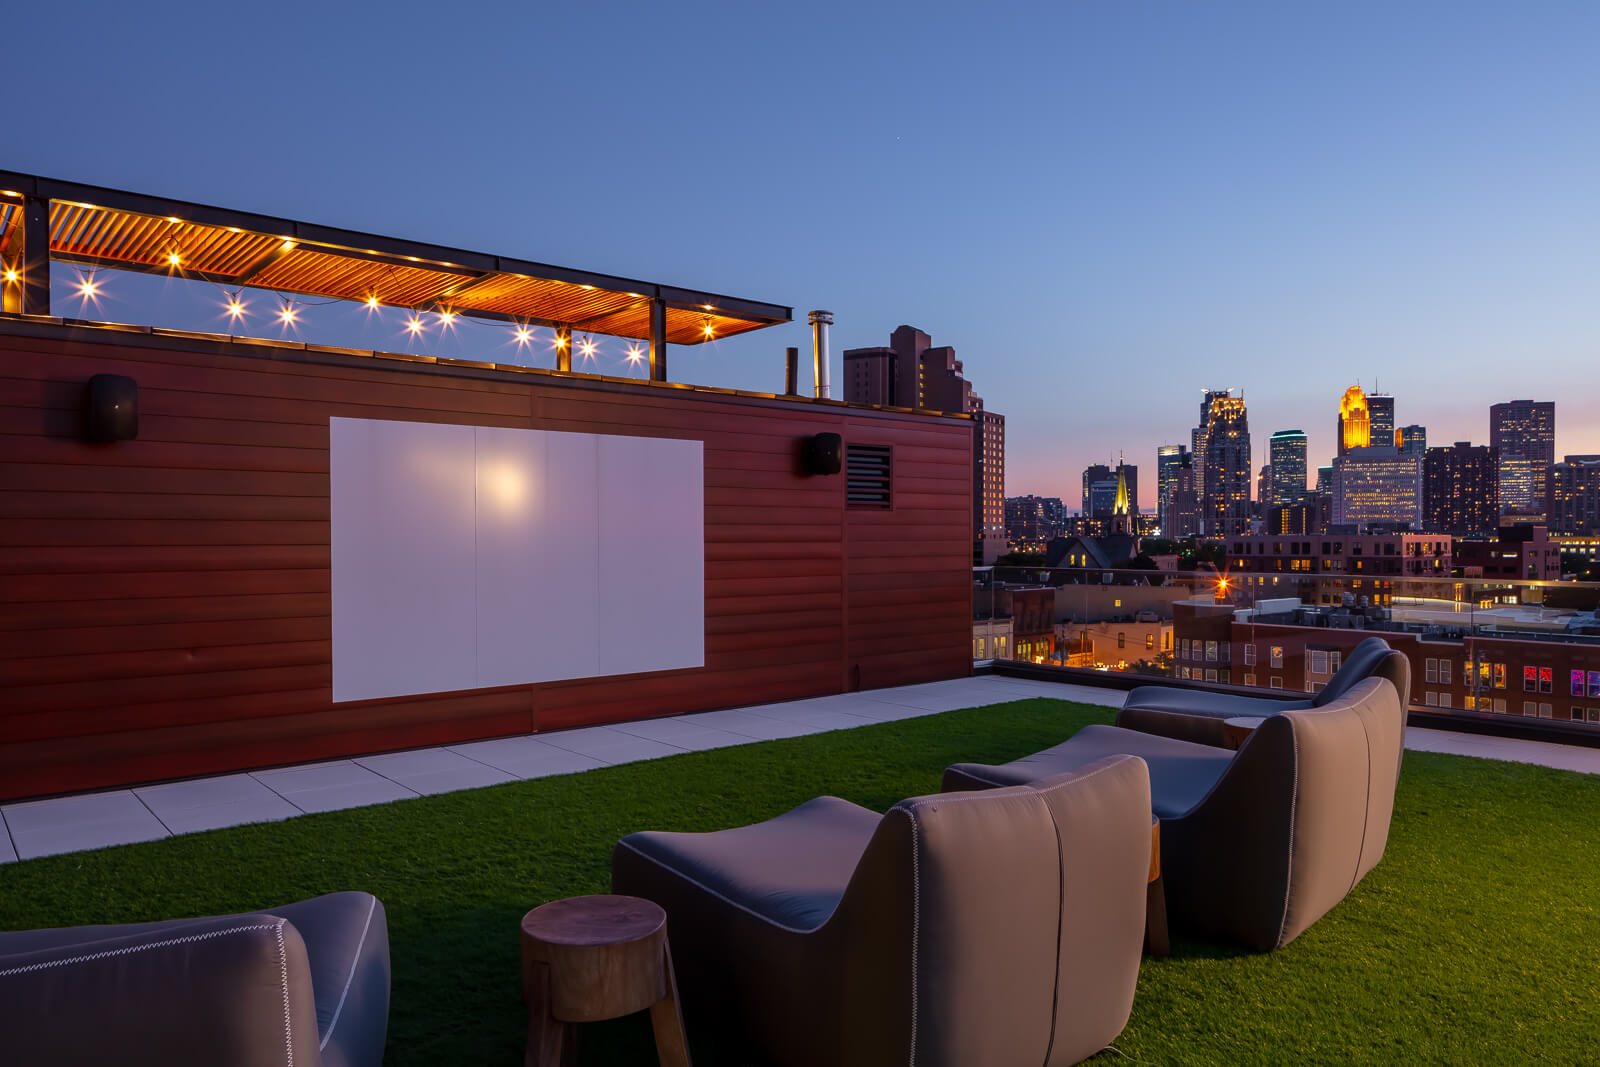 Outdoor projection screen with lounge seating on turf